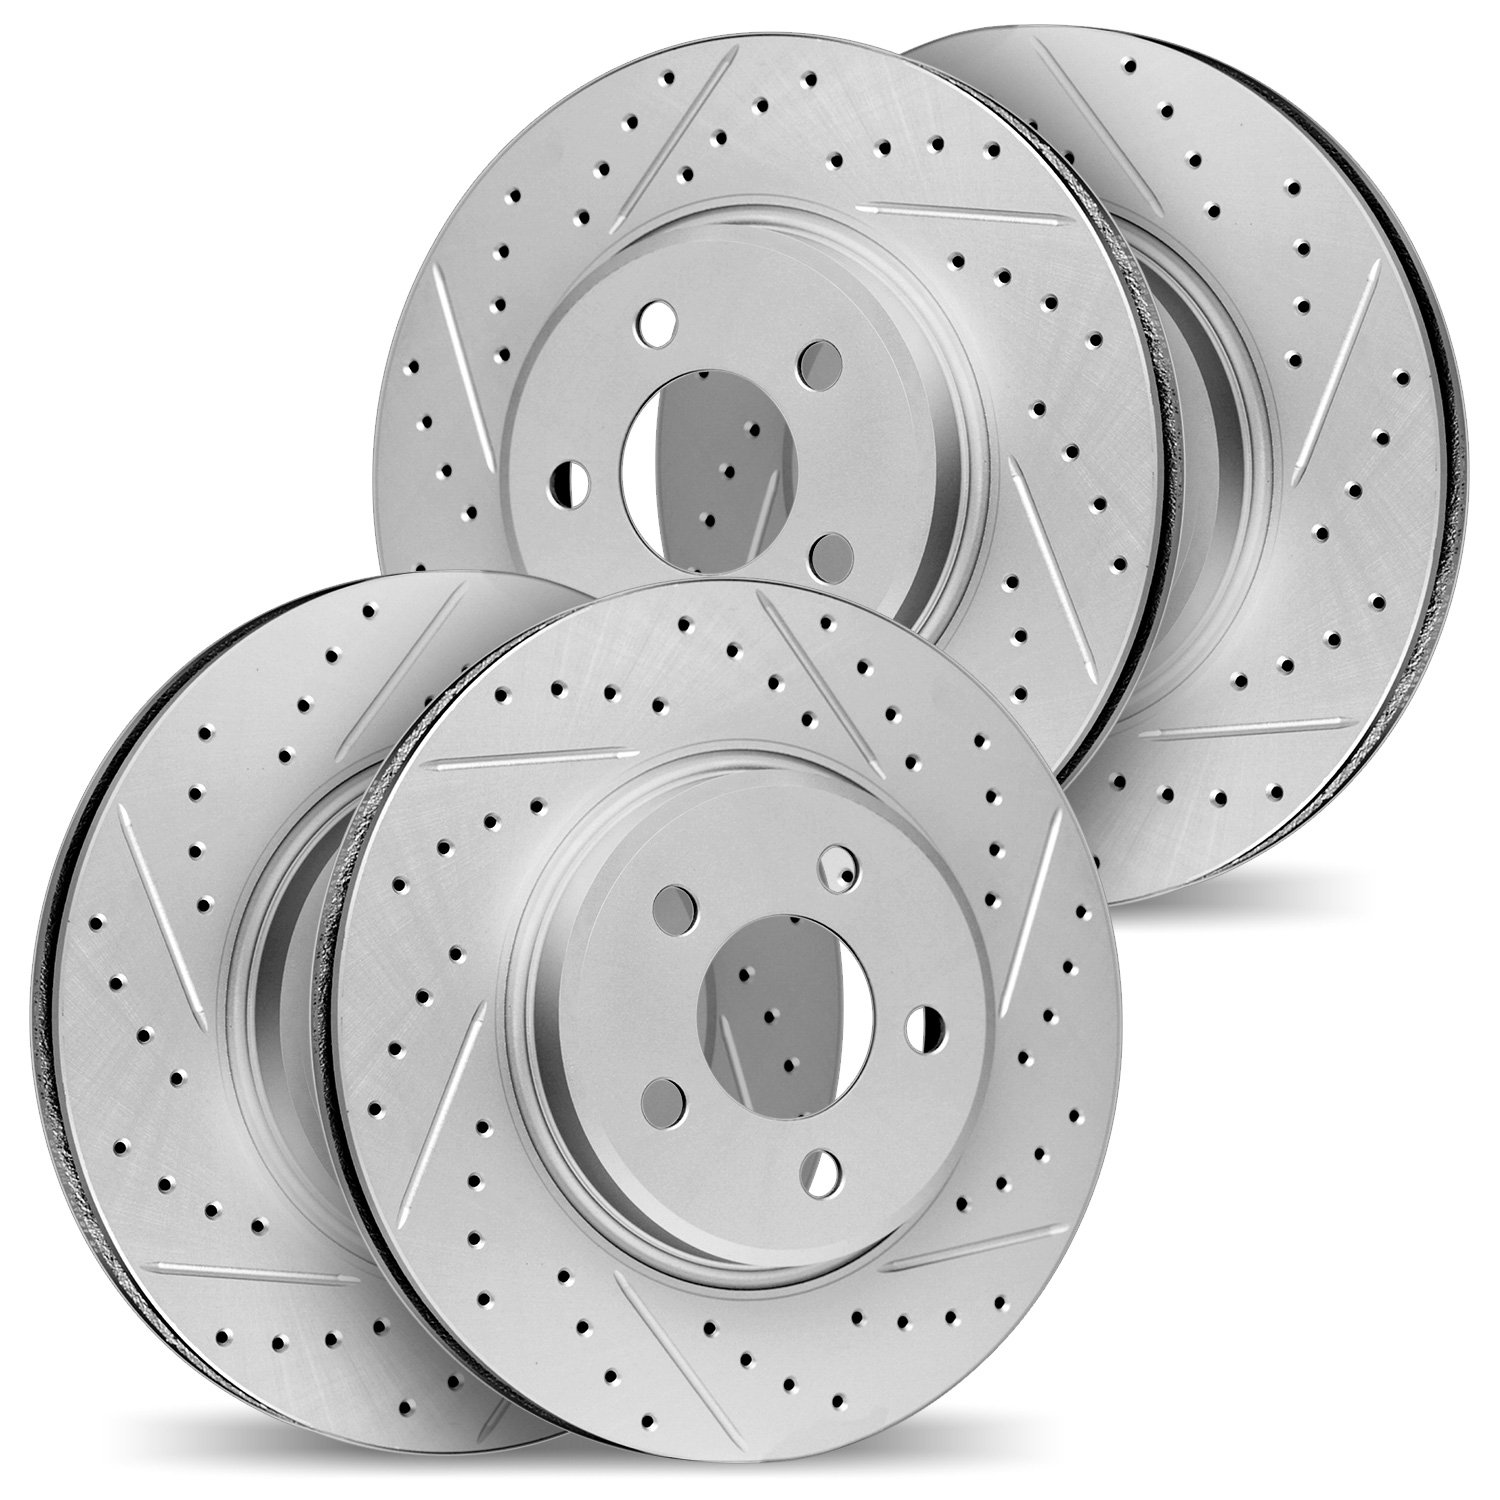 2004-13016 Geoperformance Drilled/Slotted Brake Rotors, 2014-2018 Subaru, Position: Front and Rear